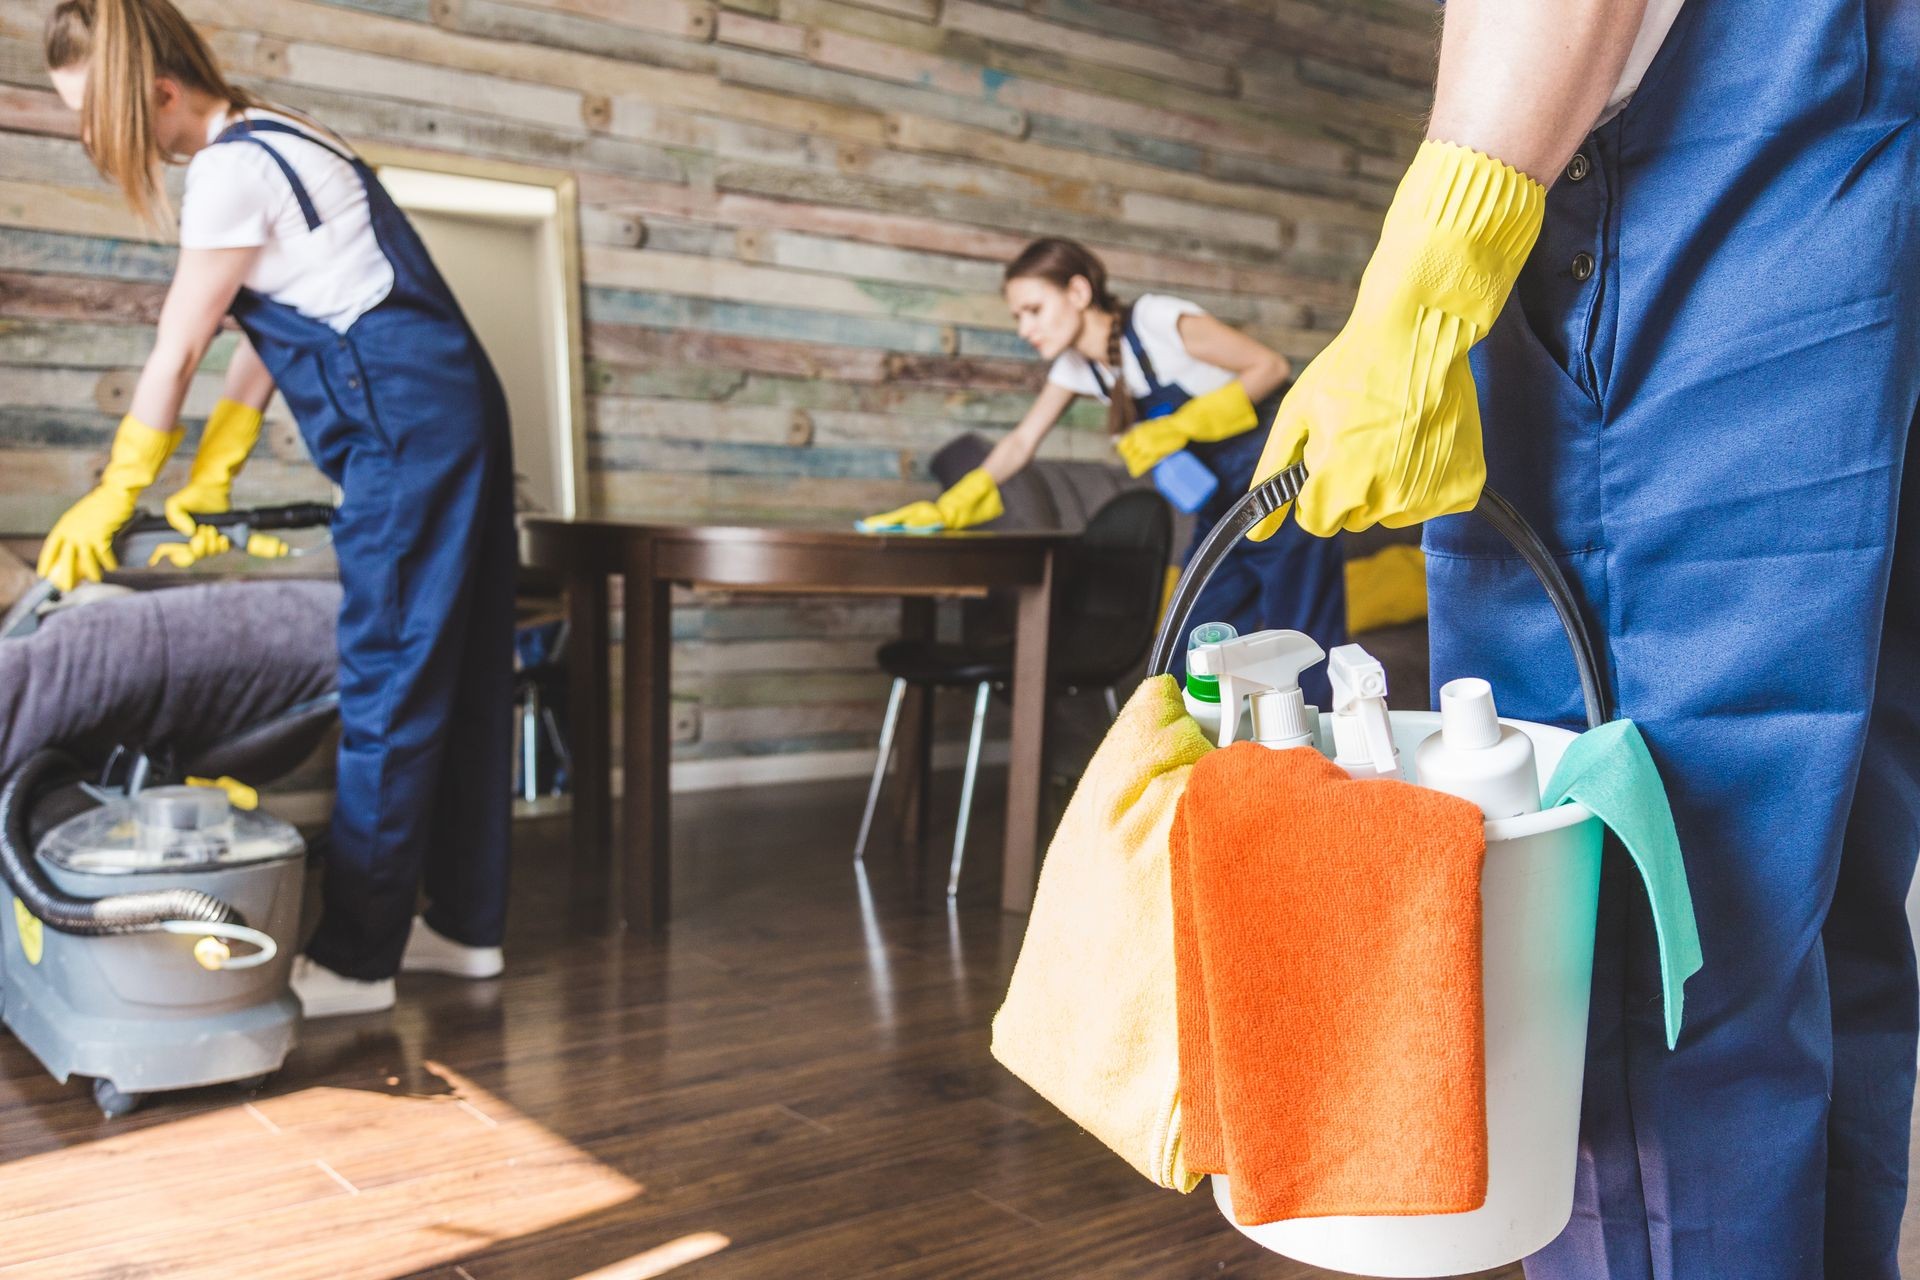 Cleaning service with professional equipment during work. professional kitchenette cleaning, sofa dry cleaning, window and floor washing. man and women in uniform, overalls and rubber gloves, student accommodation cleaning, residents halls cleaning, student house cleaning, student flat cleaning, share house cleaning